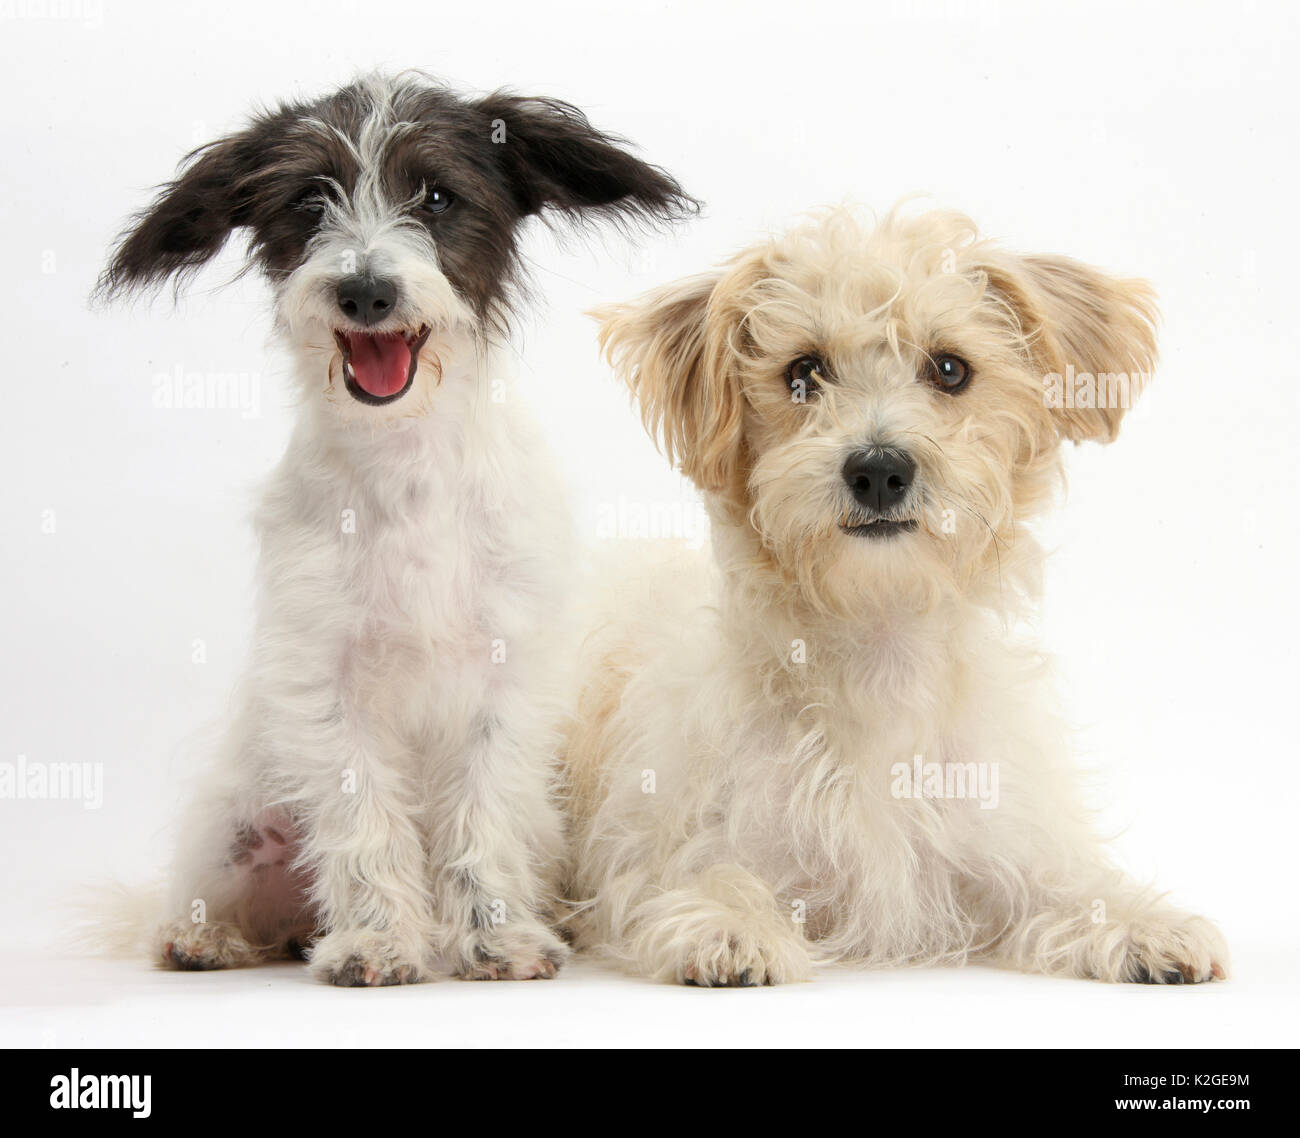 Black-and-white Jack-a-poo, Jack Russell cross Poodle puppy, age 4 months  with Bichon Frise x Jack Russell Stock Photo - Alamy